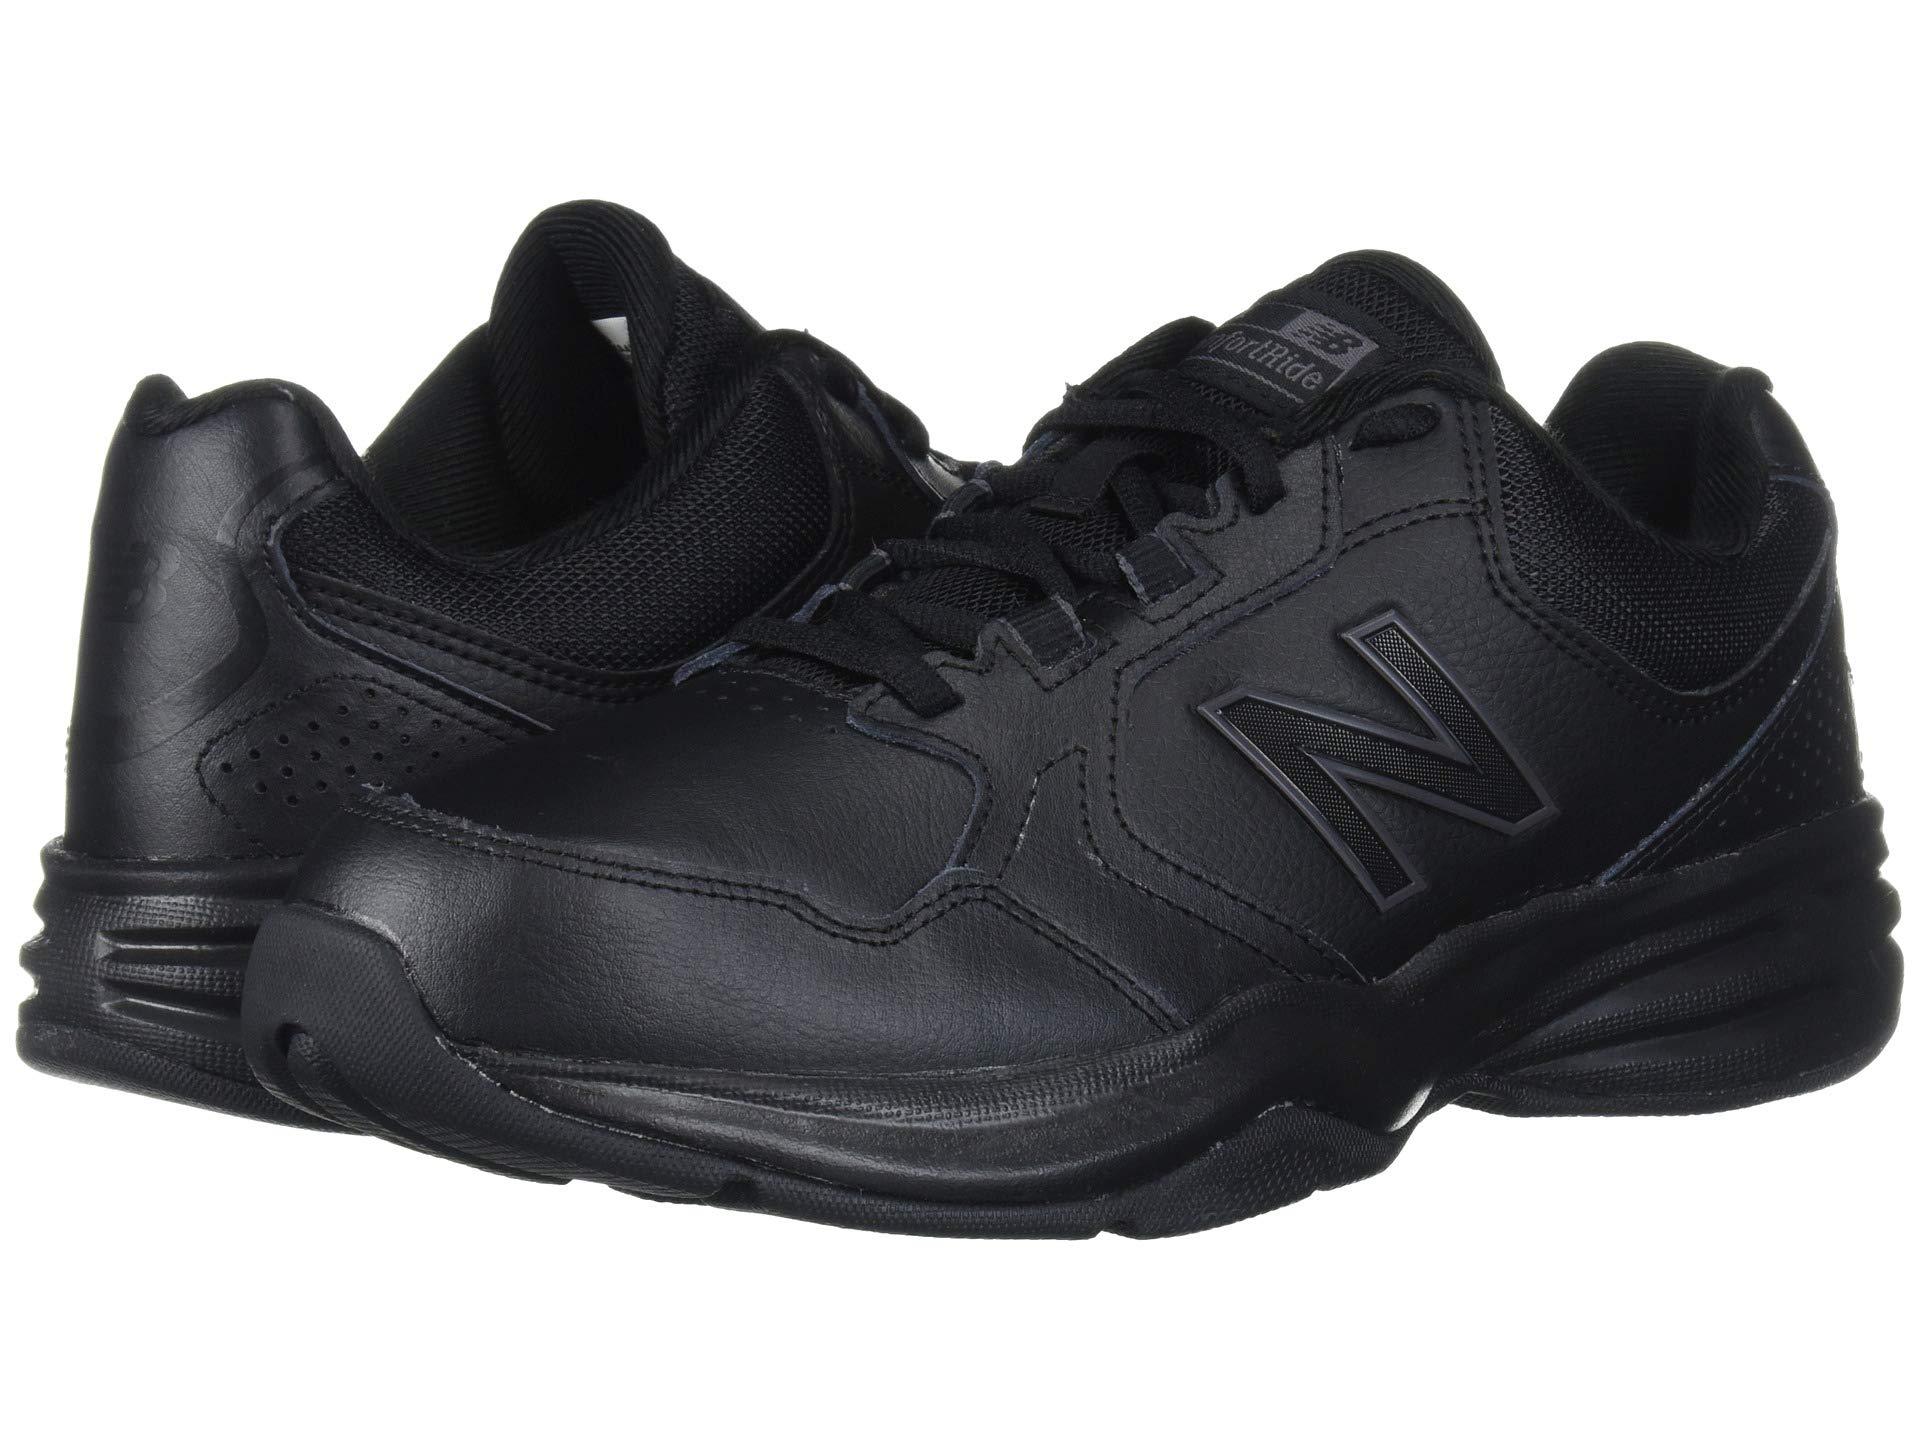 New Balance Synthetic 411 in Black for Men - Lyst